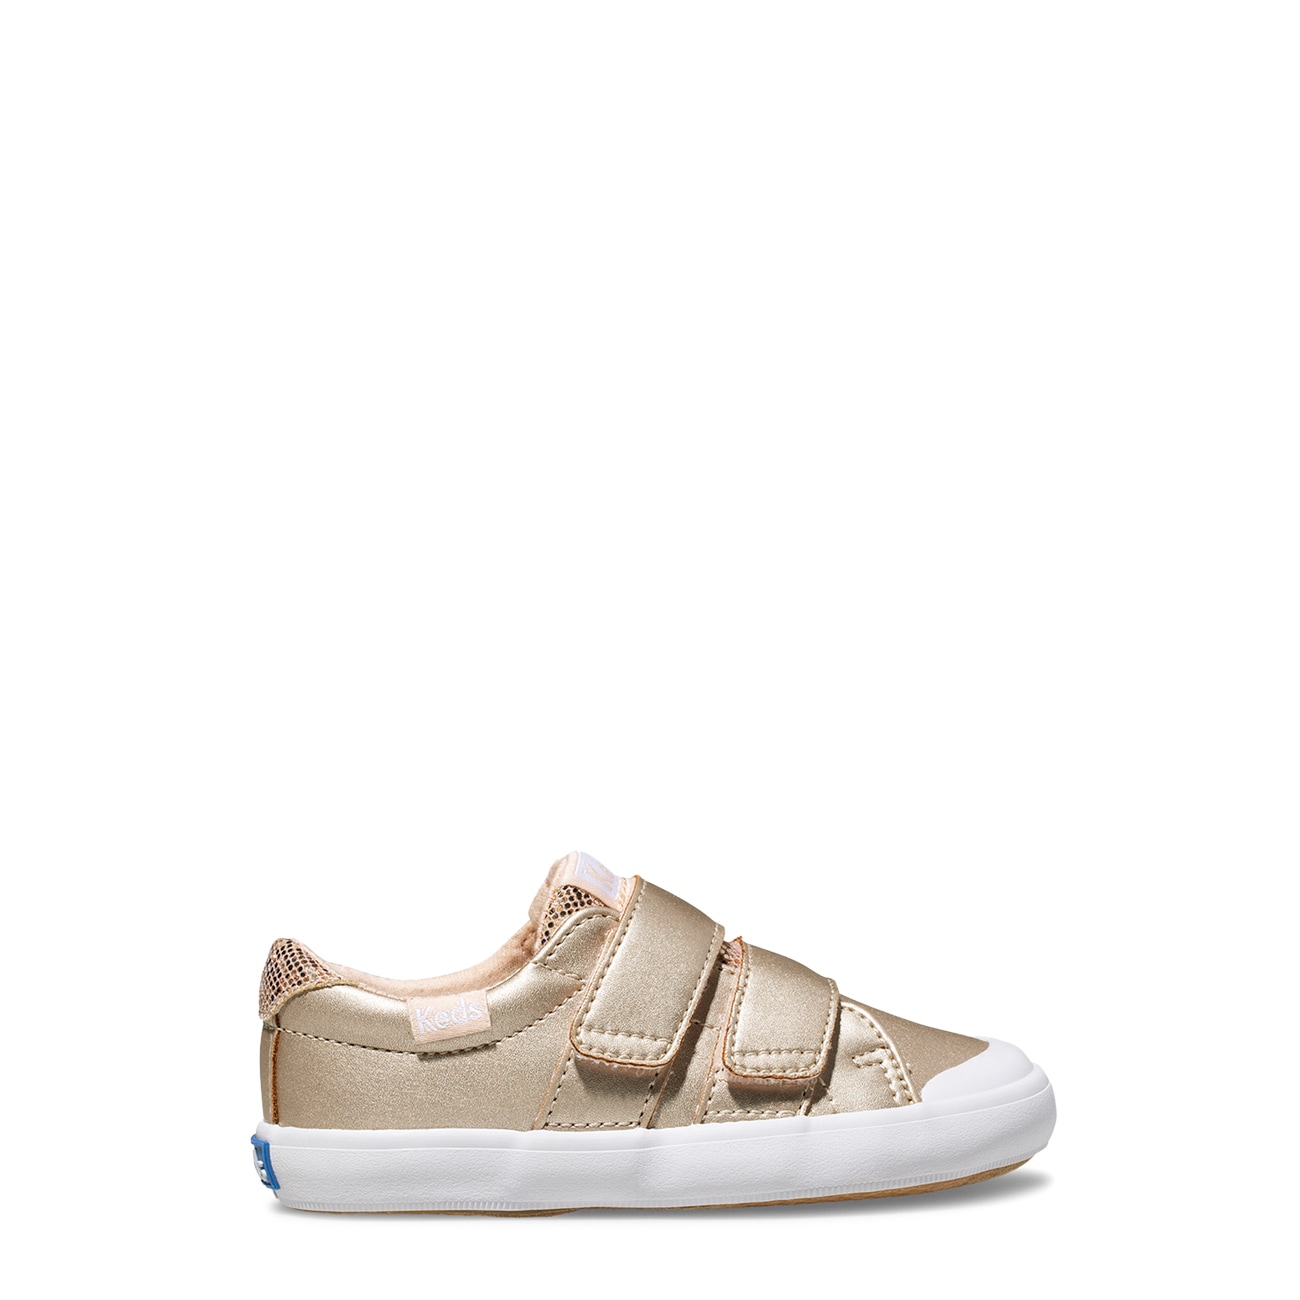 Keds Toddler Girls' Courtney HL Sneaker | The Shoe Company